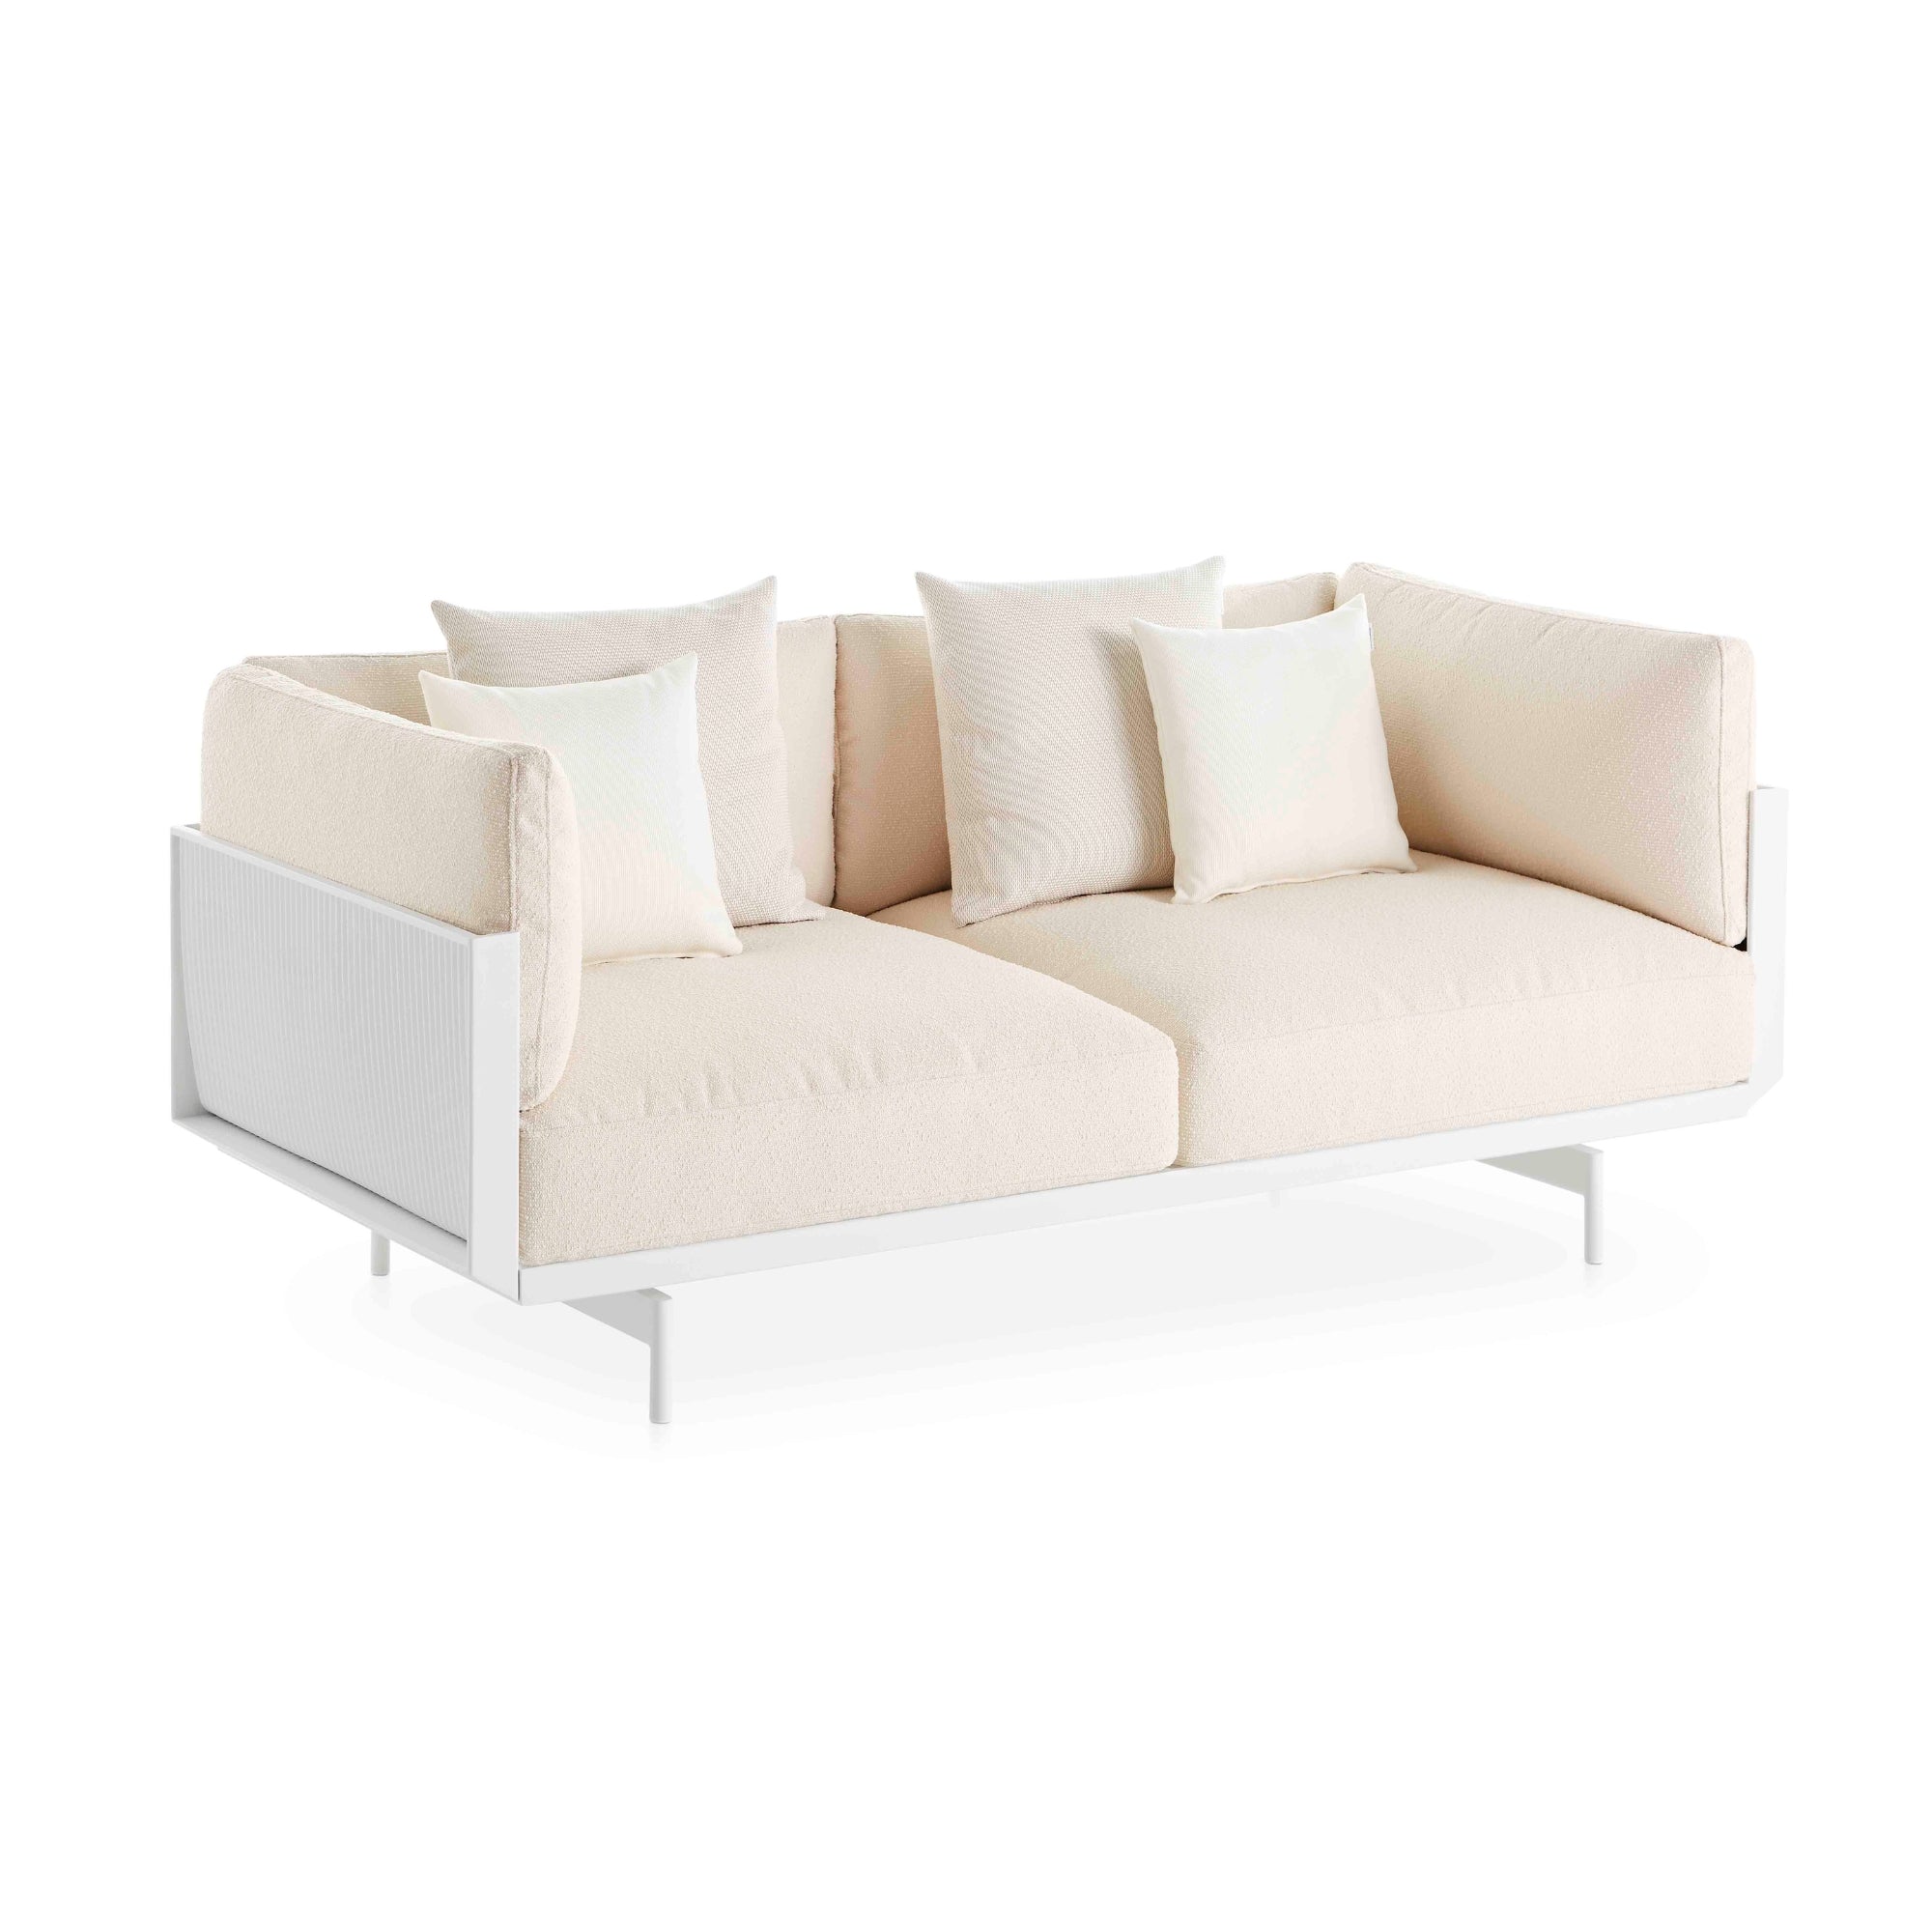 Onde 2-seater Sofa - THAT COOL LIVING